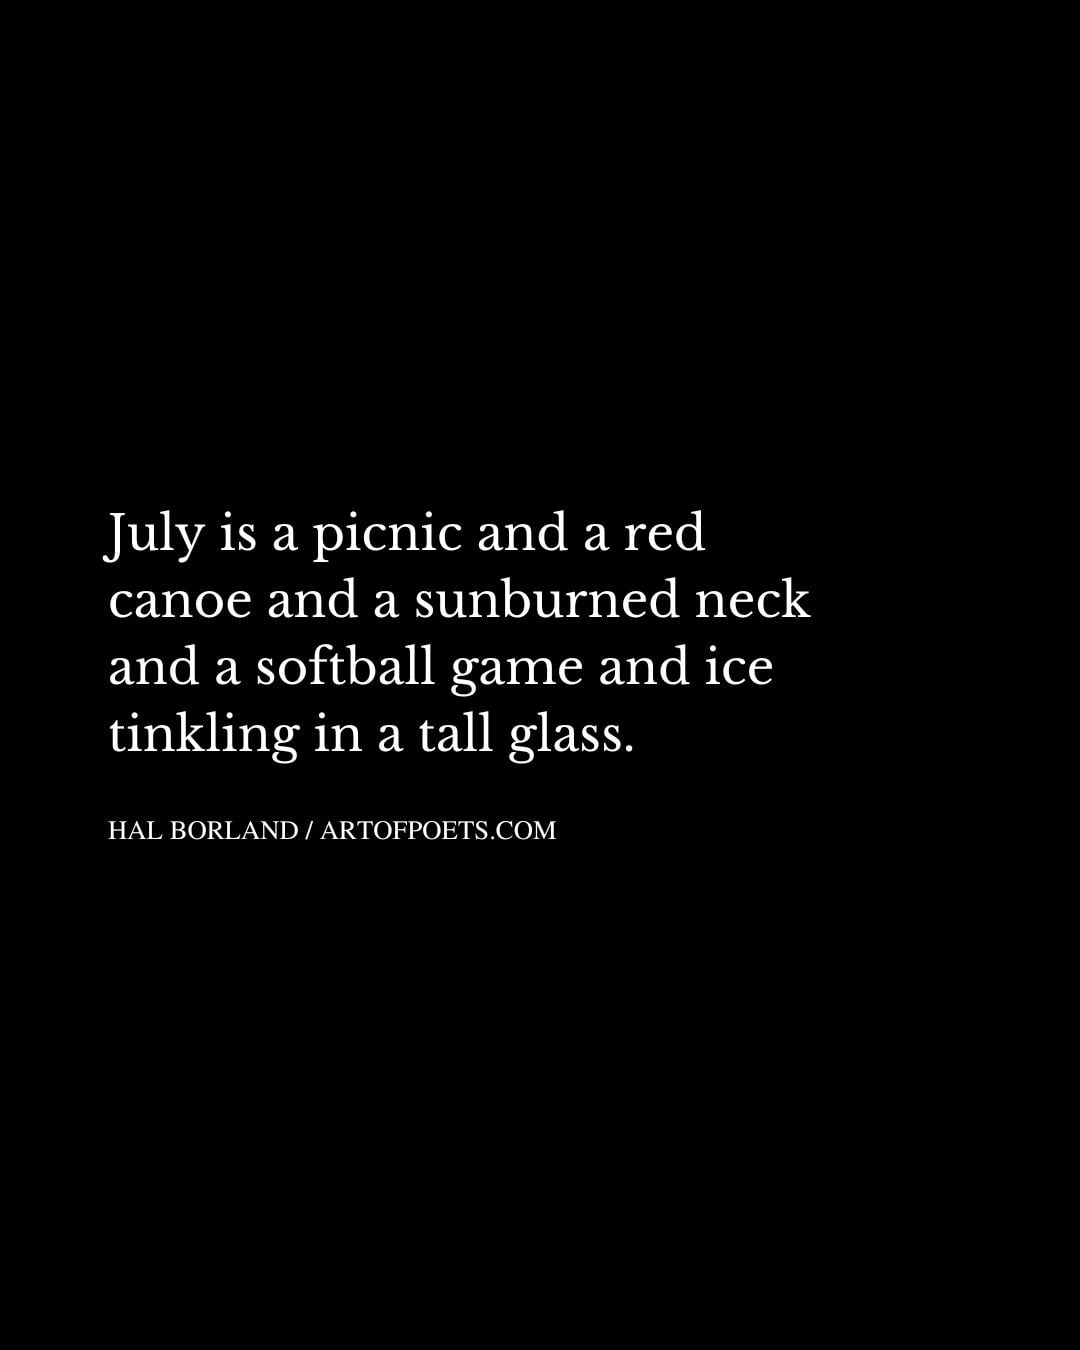 July is a picnic and a red canoe and a sunburned neck and a softball game and ice tinkling in a tall glass